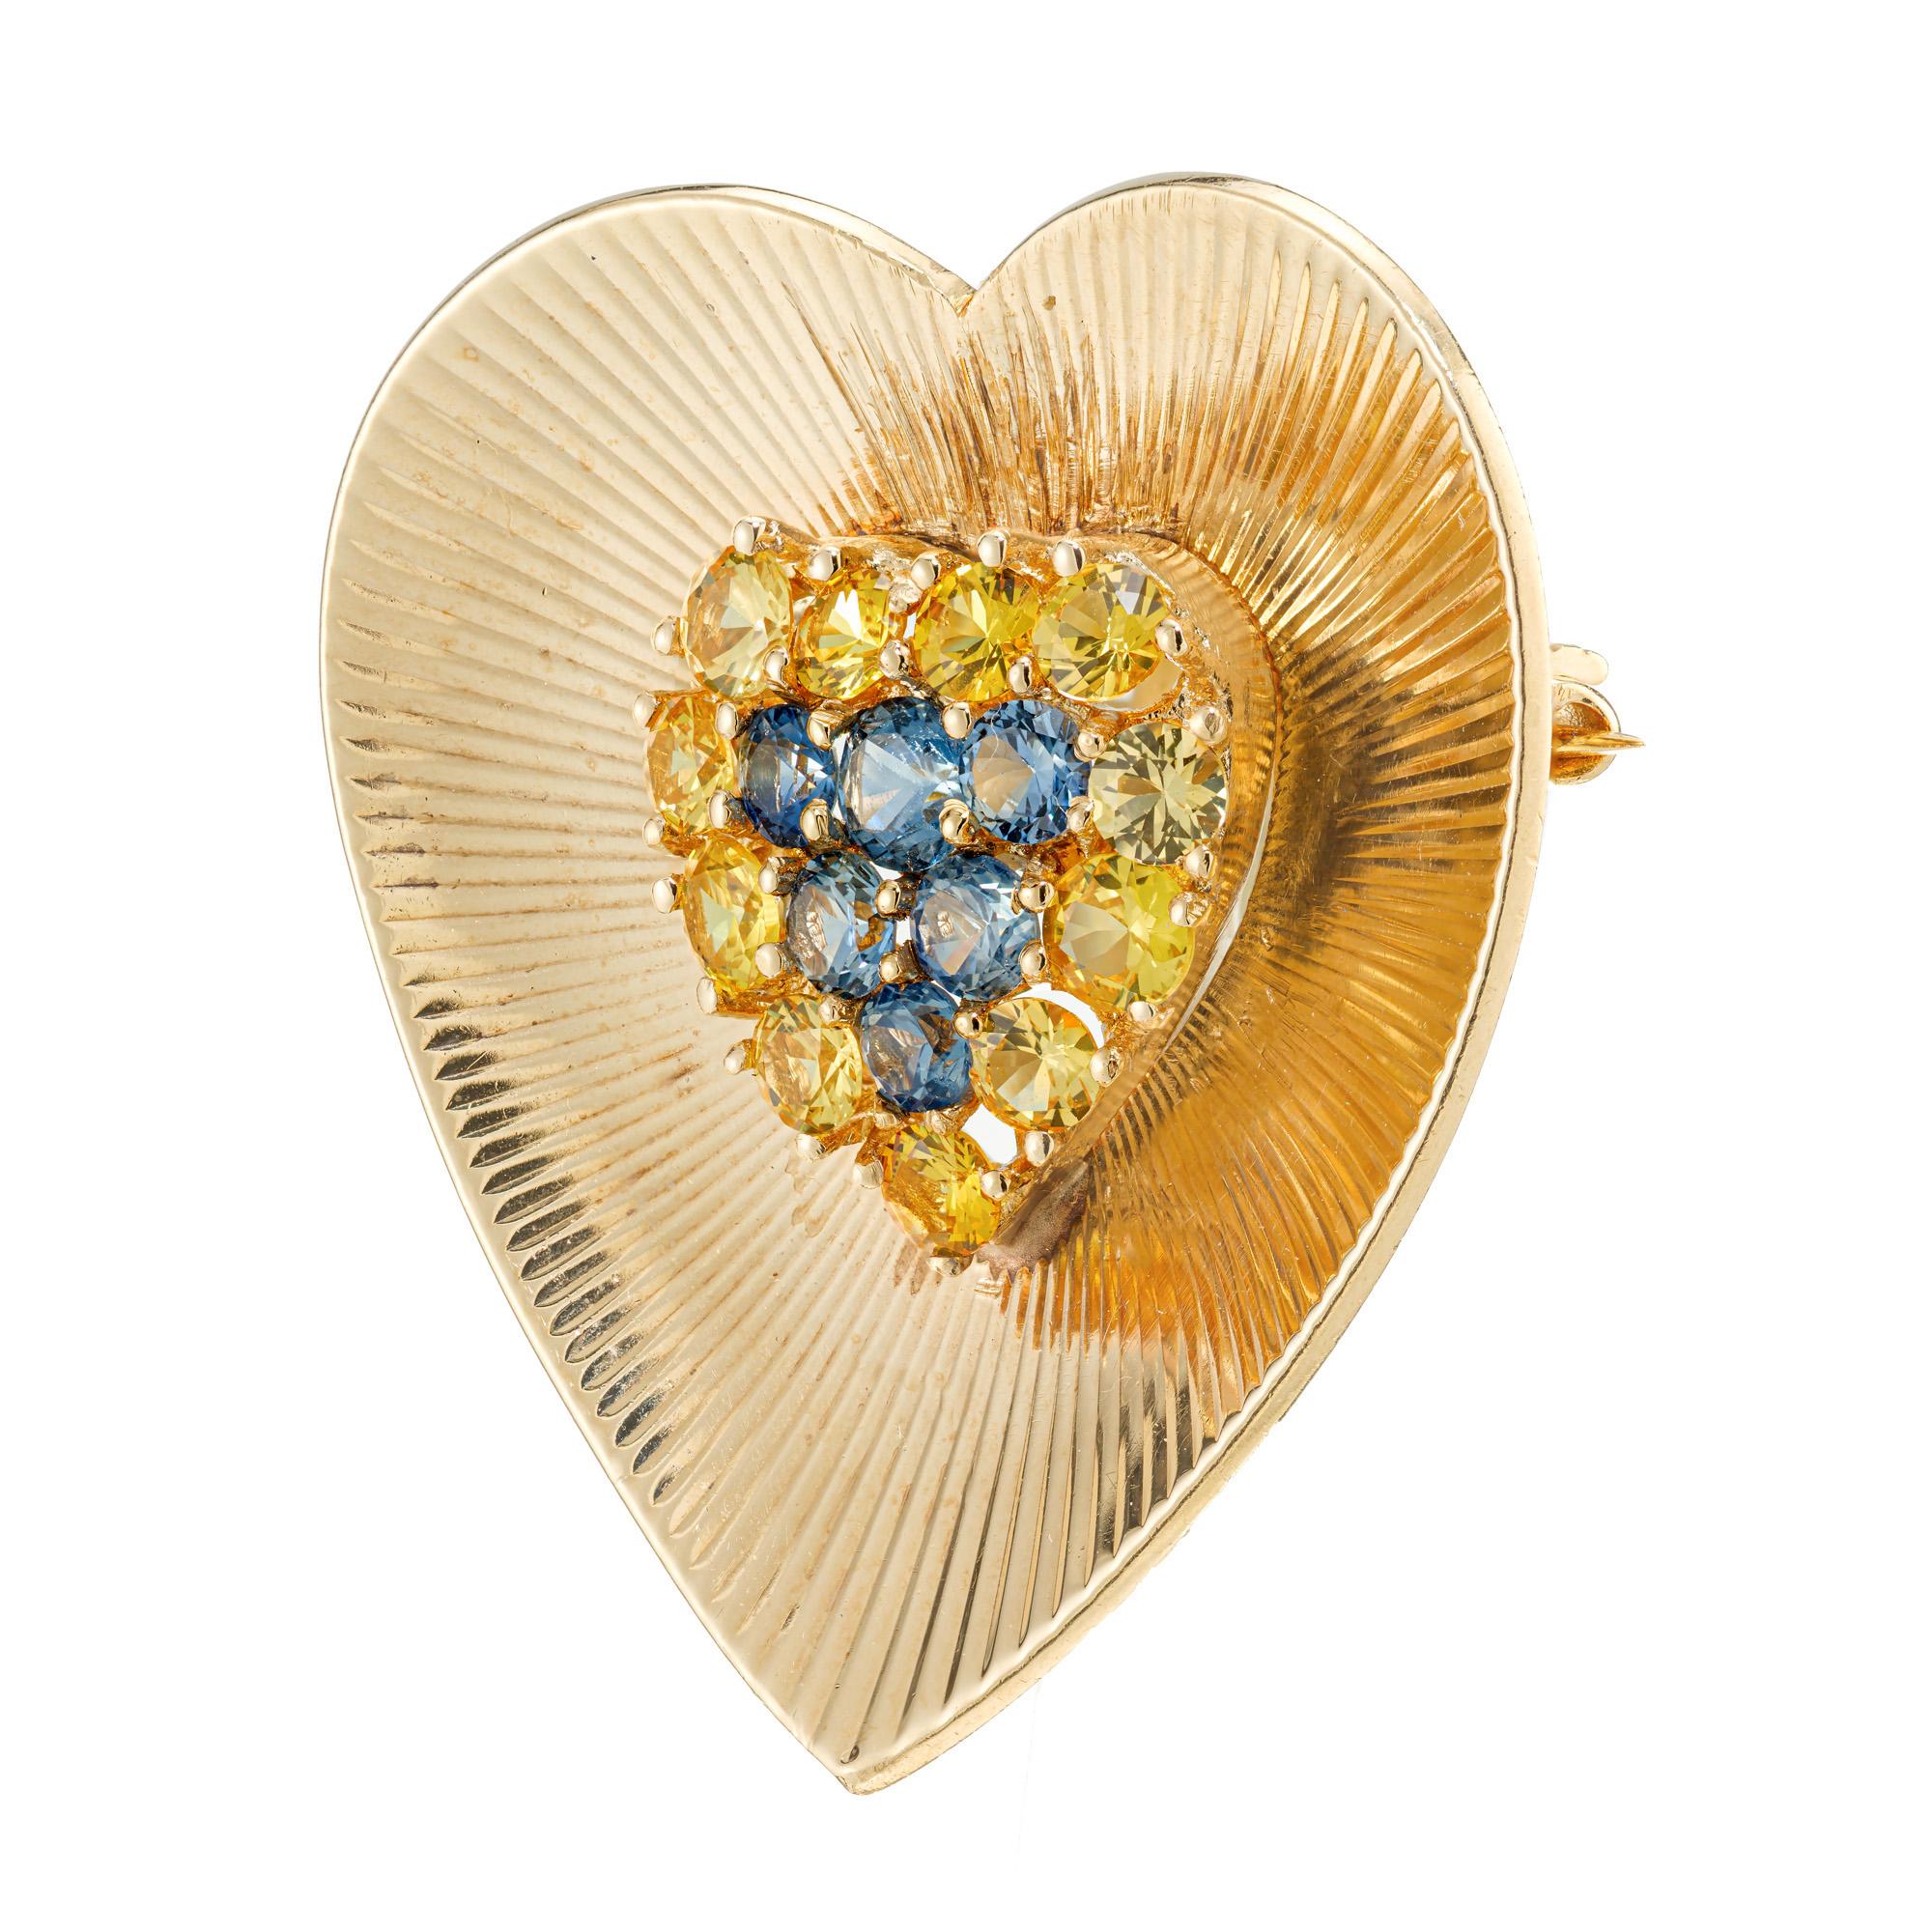 Tiffany & Co. 1940's Sapphire brooch. Set with 11 round yellow sapphires and 6 round blue sapphires in fan style heart shaped 14k yellow gold brooch. Classic early century Tiffany. 

11 round genuine yellow Sapphires, approx. total weight 1.00cts
6